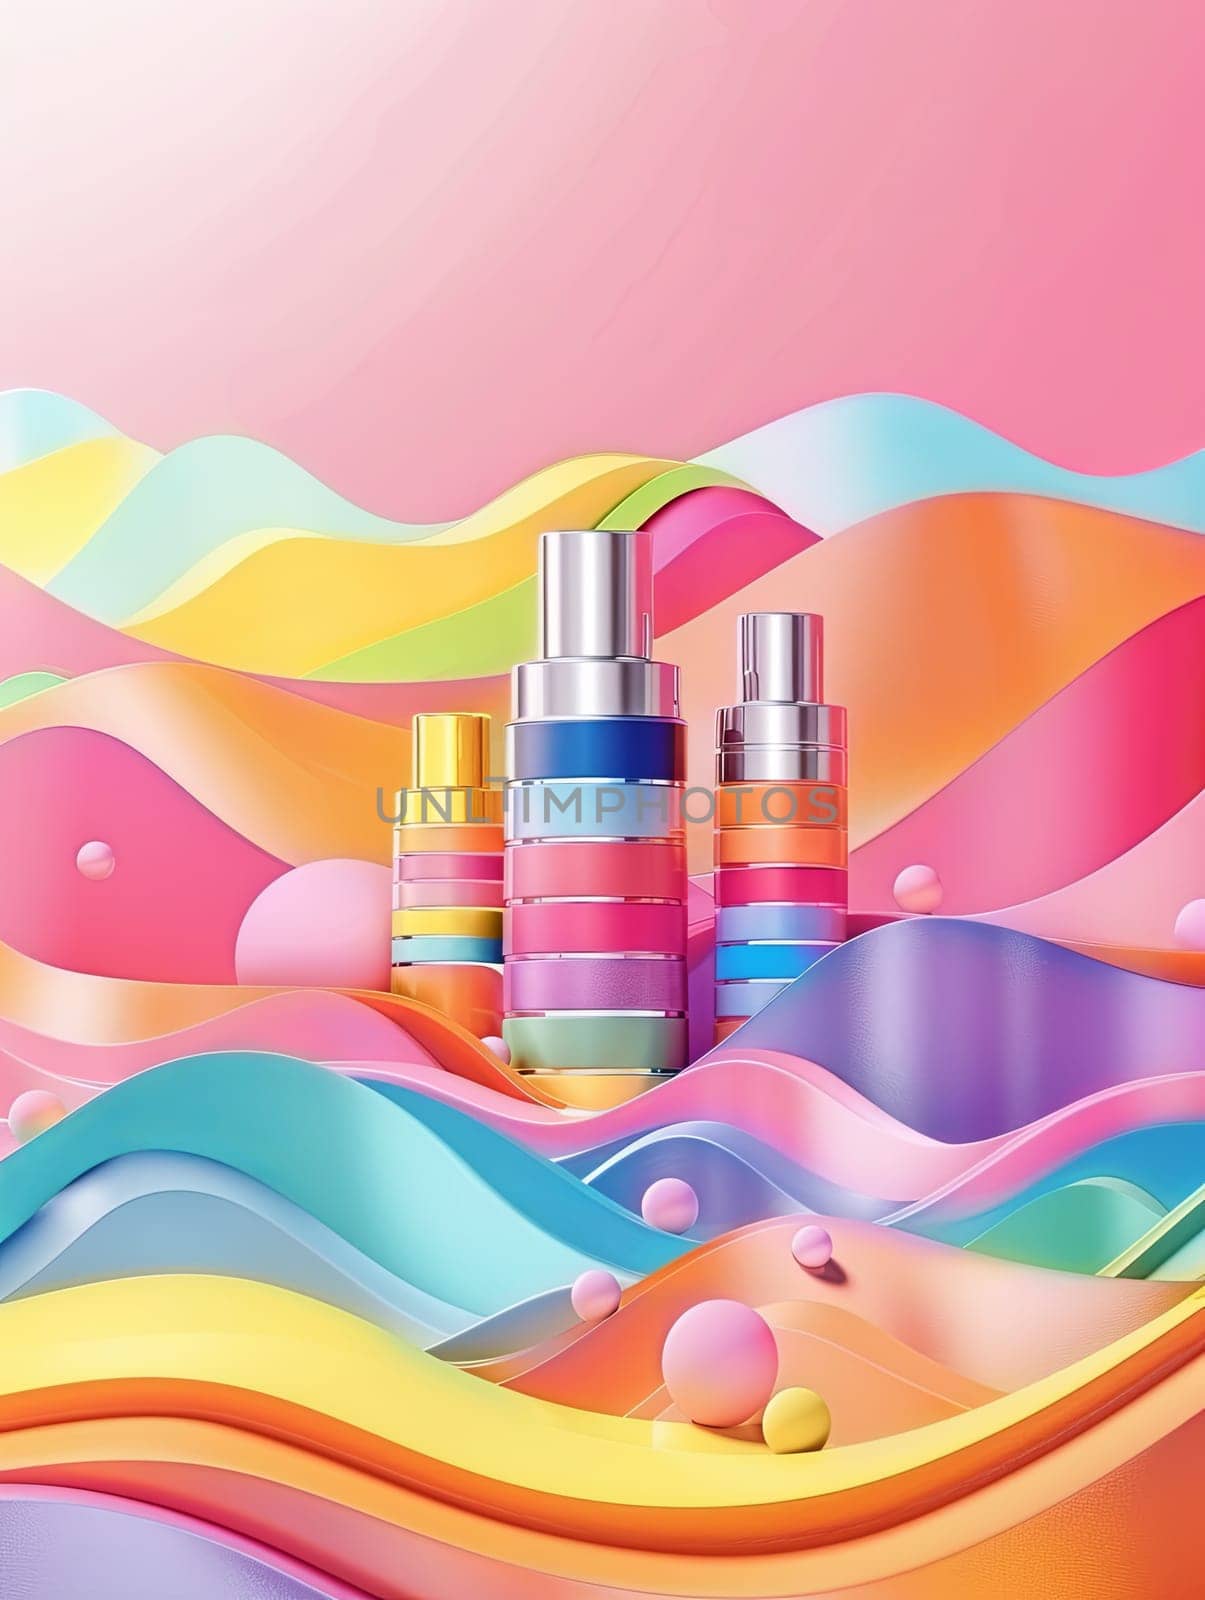 Group of cosmetics bottles arranged on top of a colorful wave background.